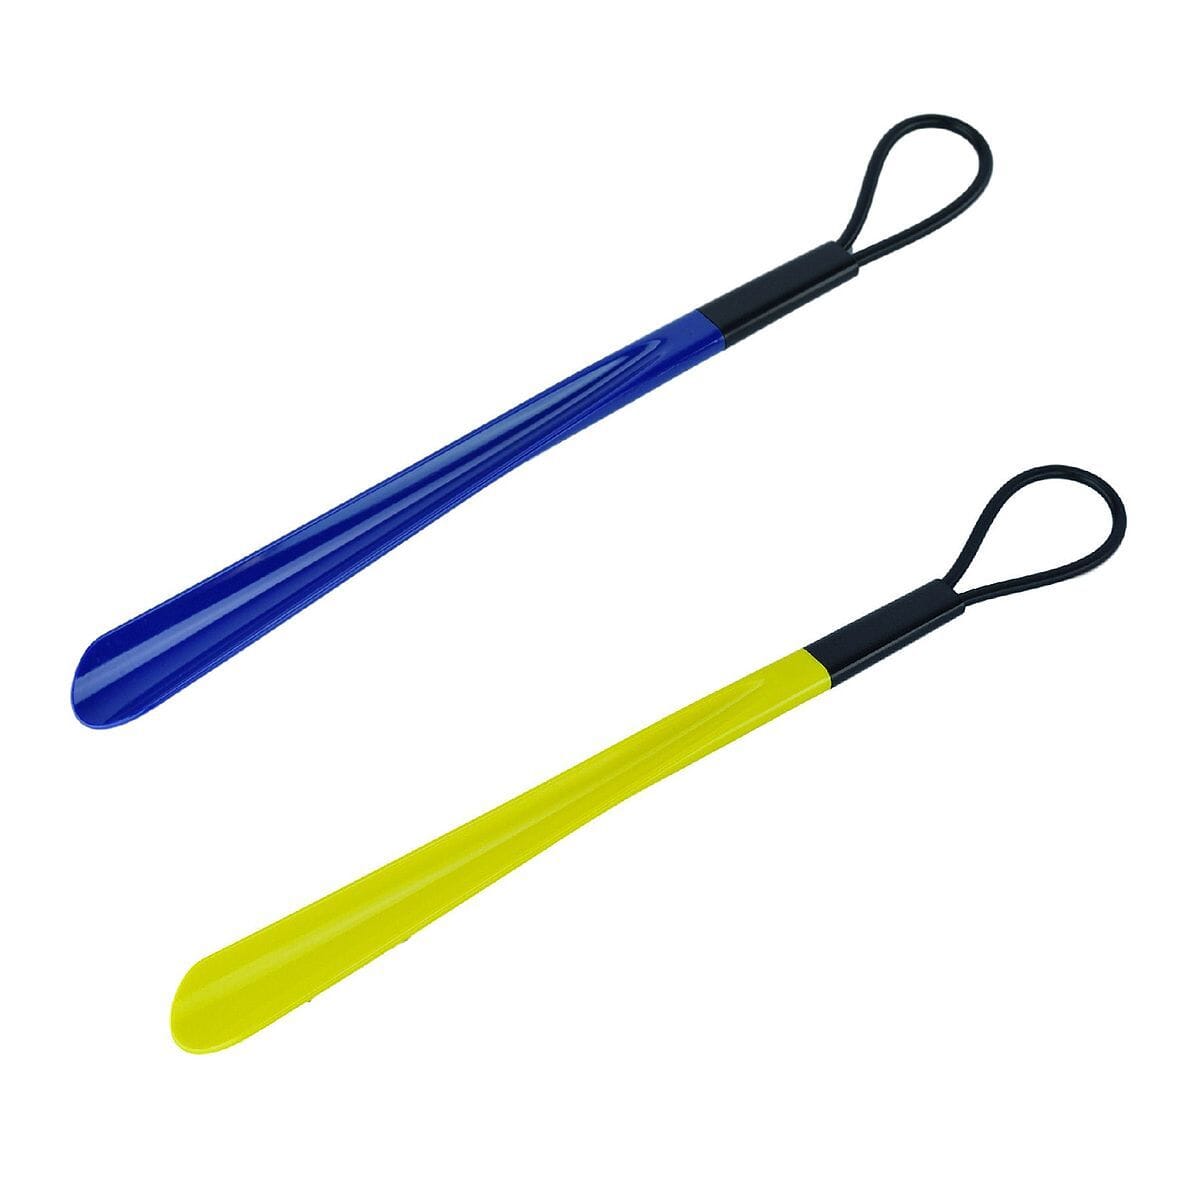 View Deluxe Shoe Horn with Looped Hanger Blue information